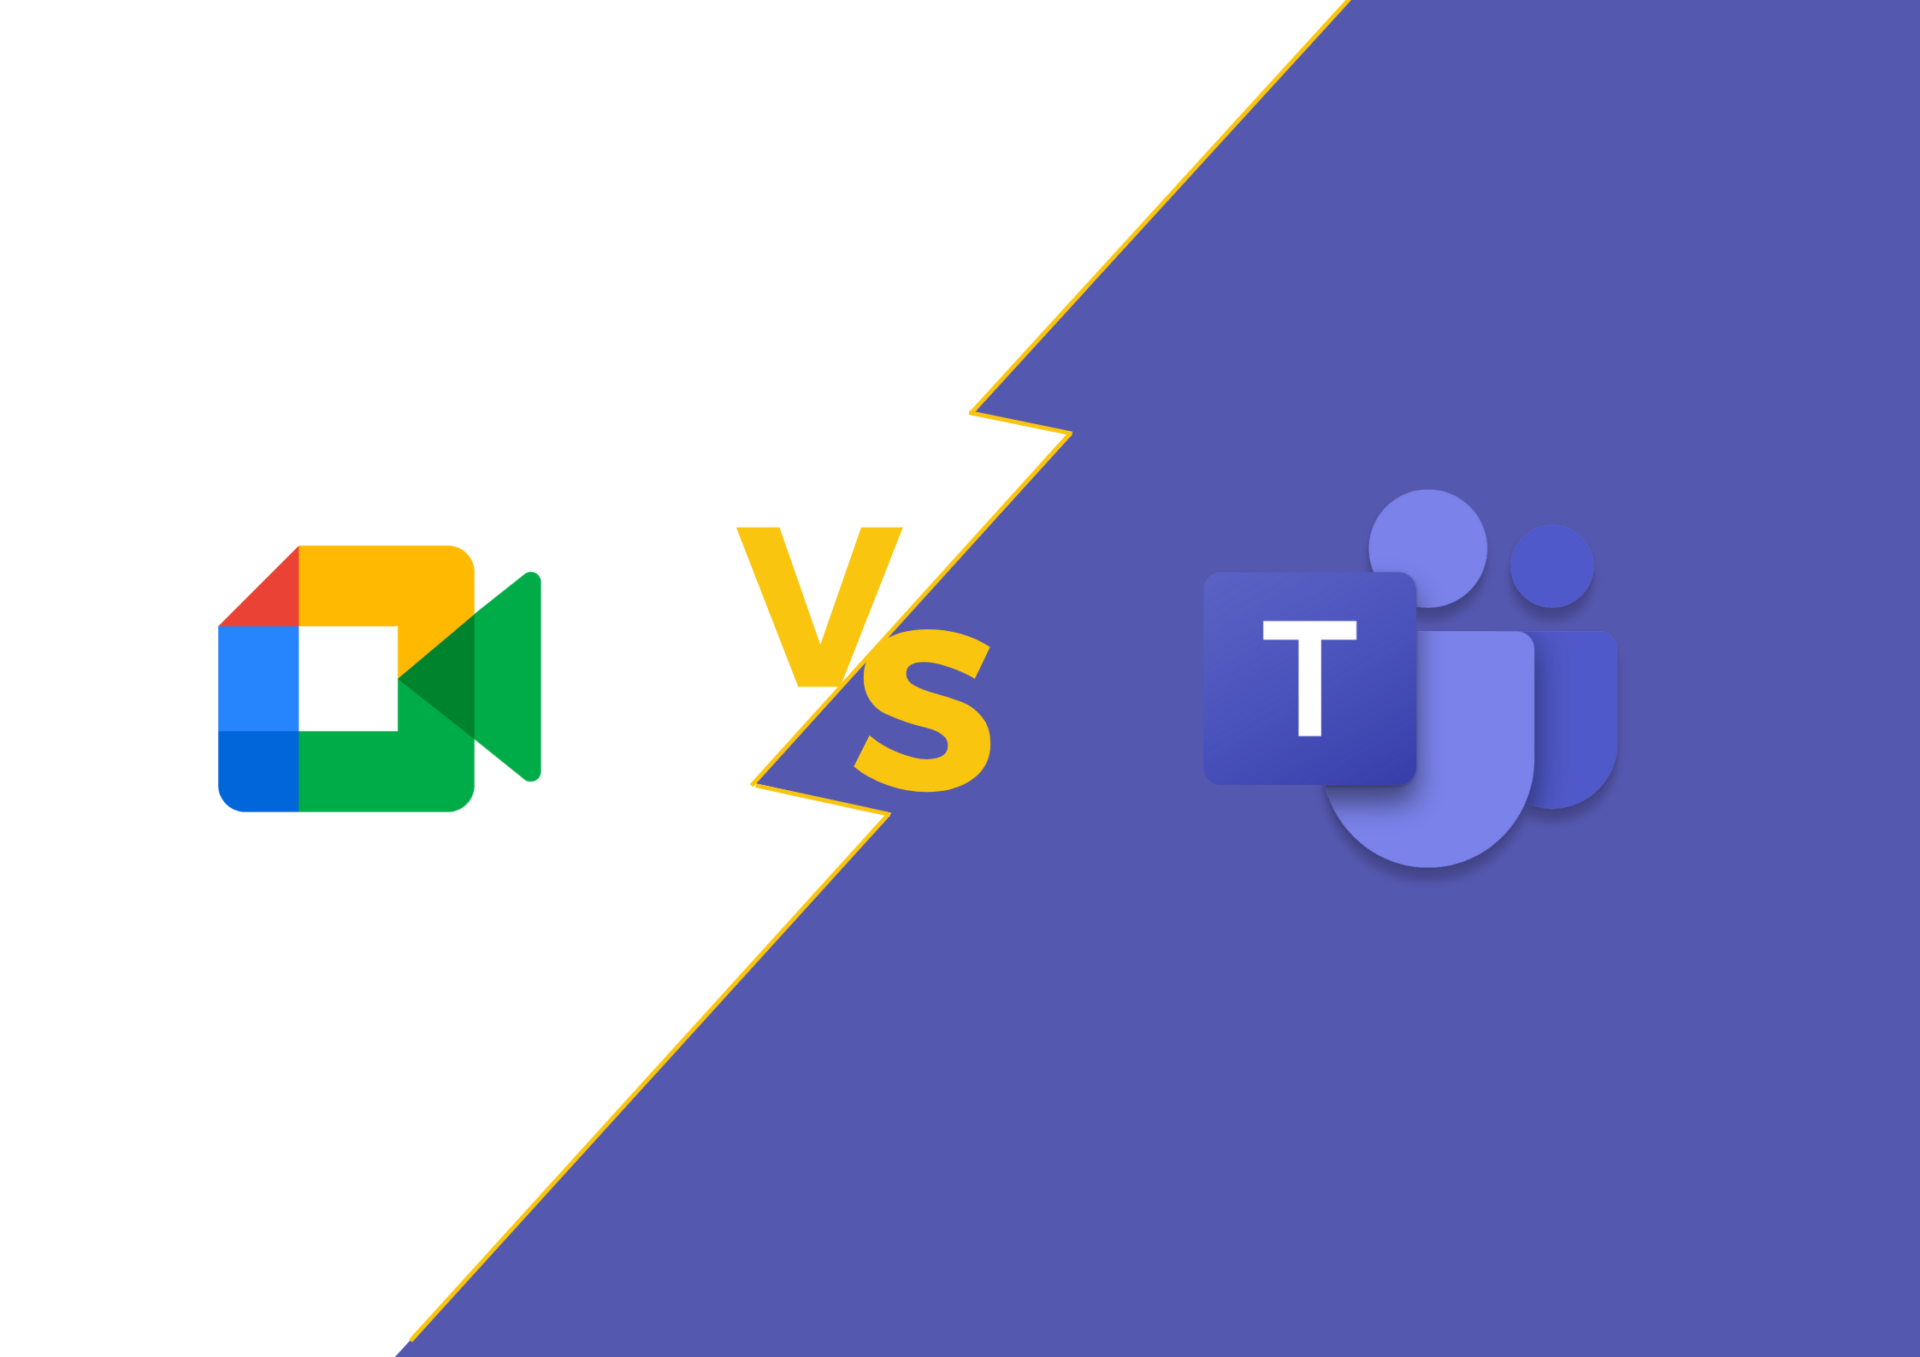 Microsoft Teams Vs Google Meet - Which Is The Better Tool?